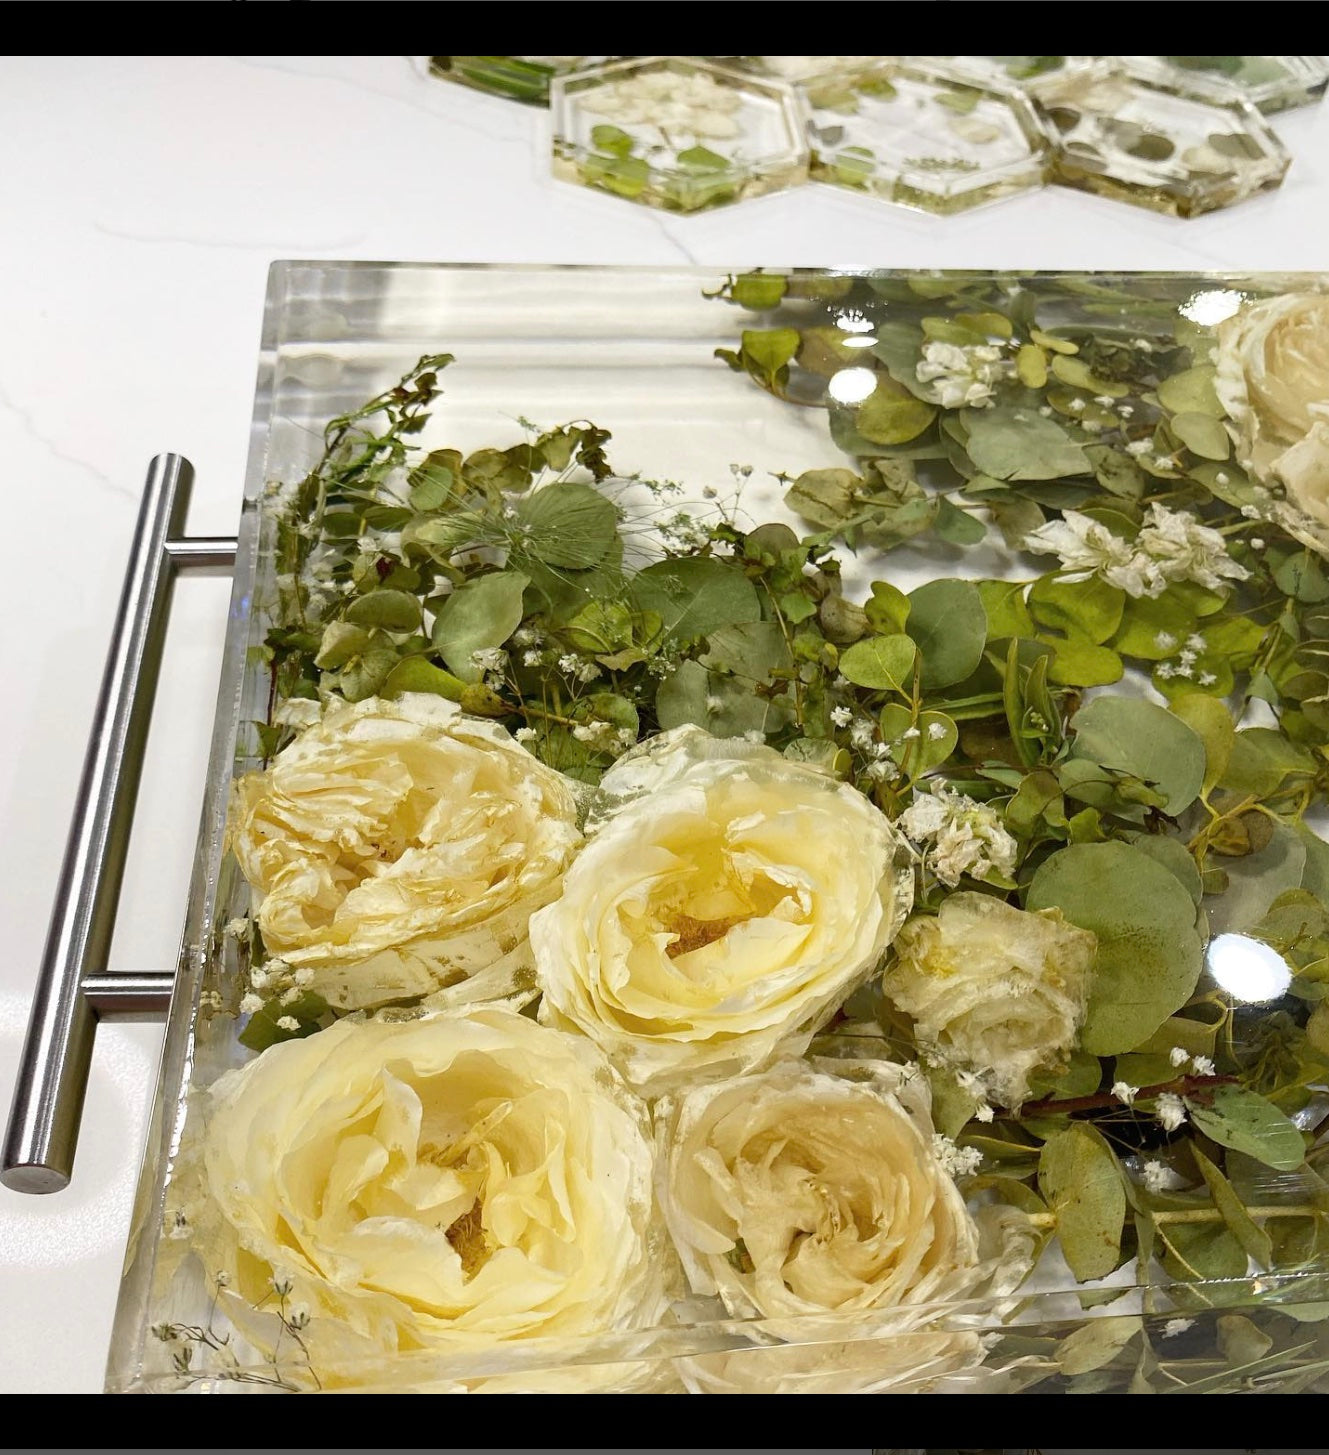 The Acrylic Serving Trays